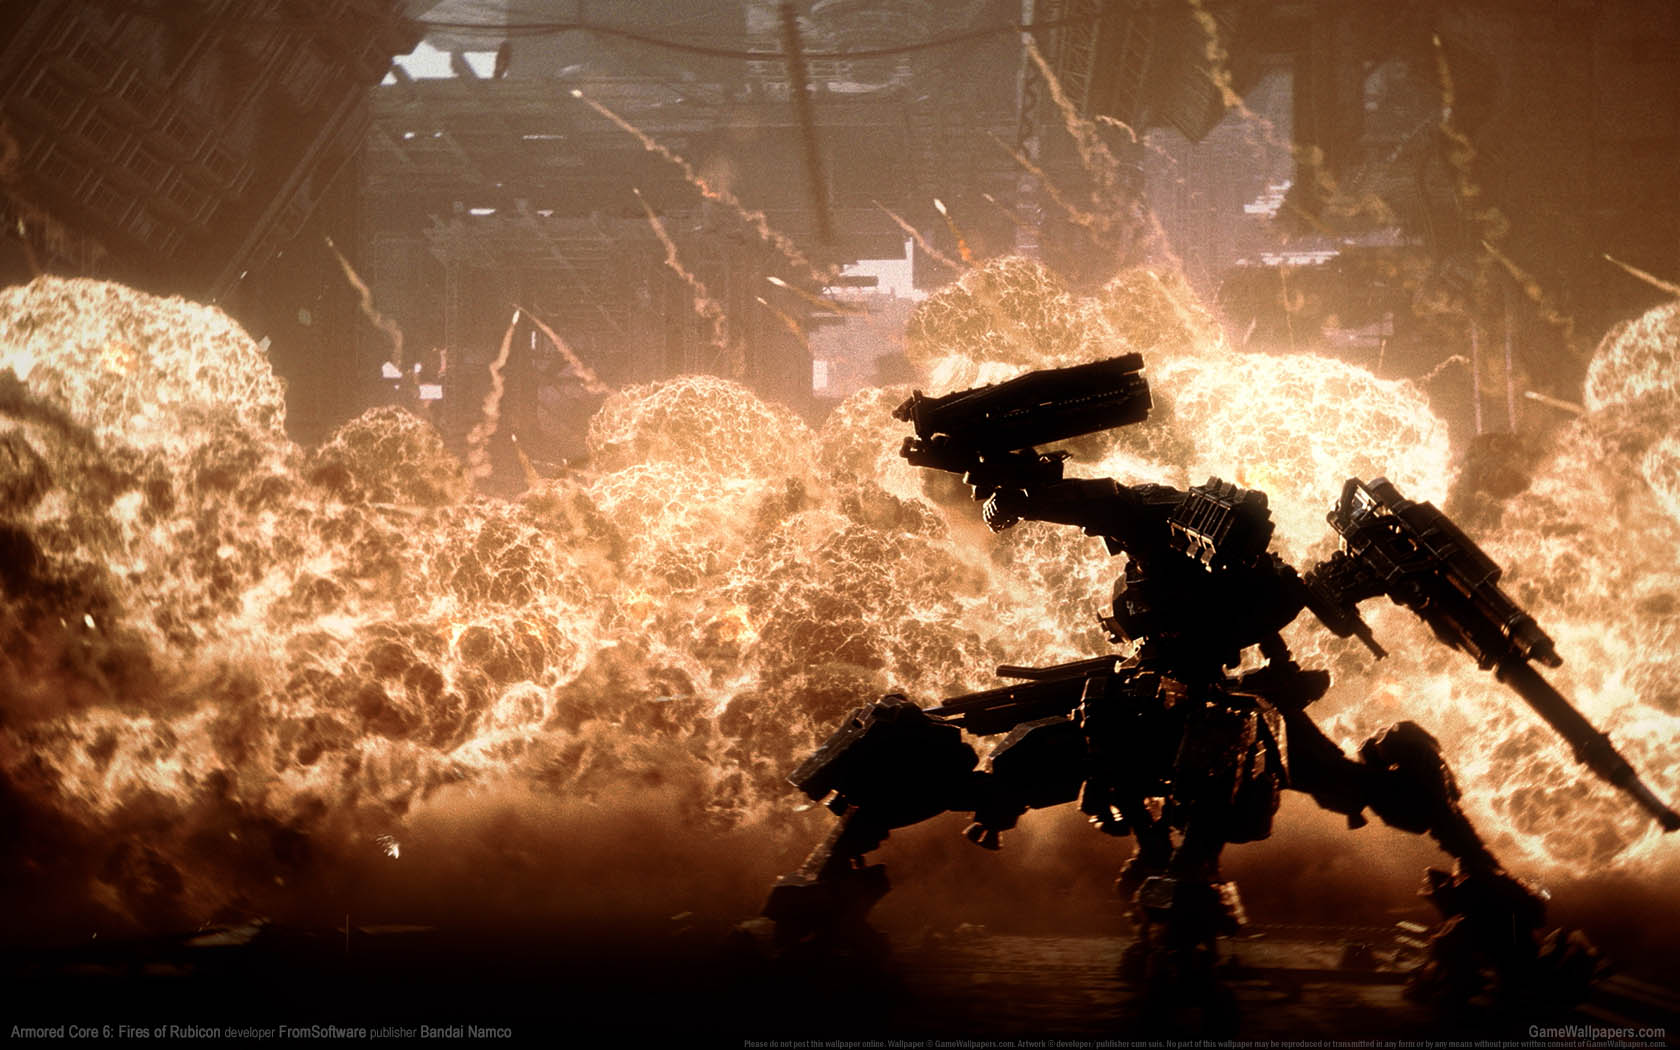 Armored Core 6: Fires of Rubicon fond d'cran 01 1680x1050